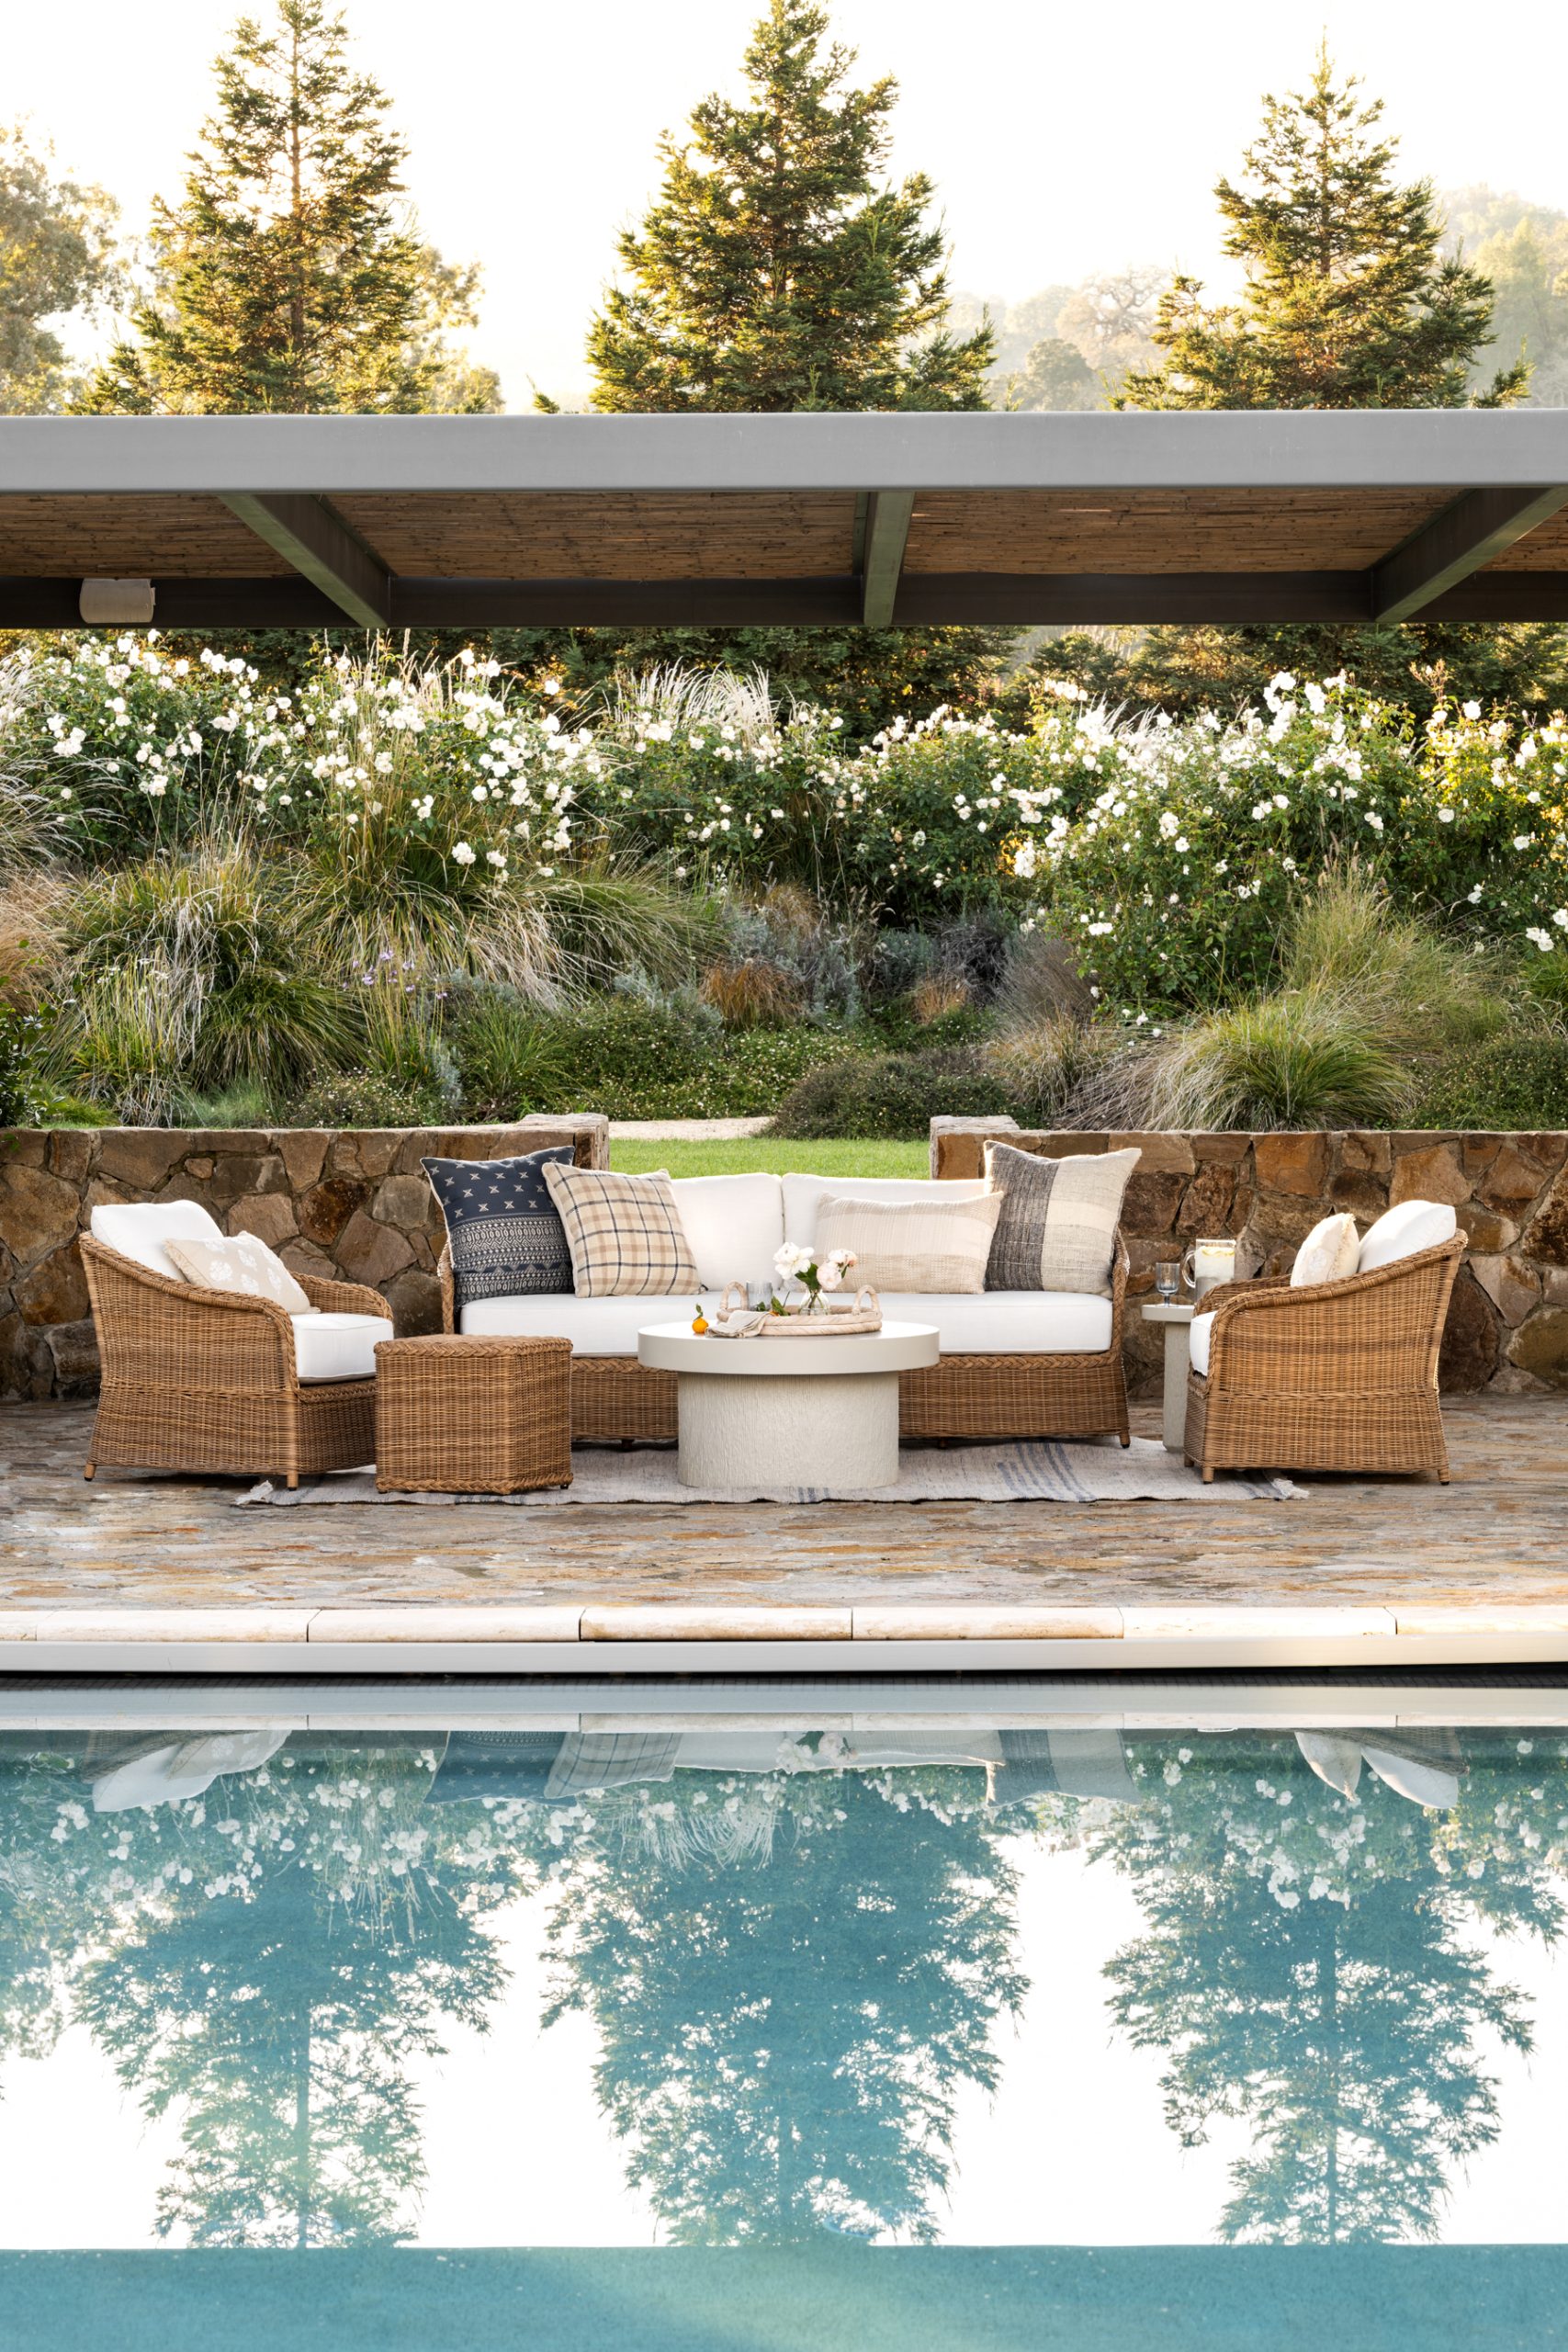 outdoor wicker lounge chairs and sofa around fiber stone coffee table by pool